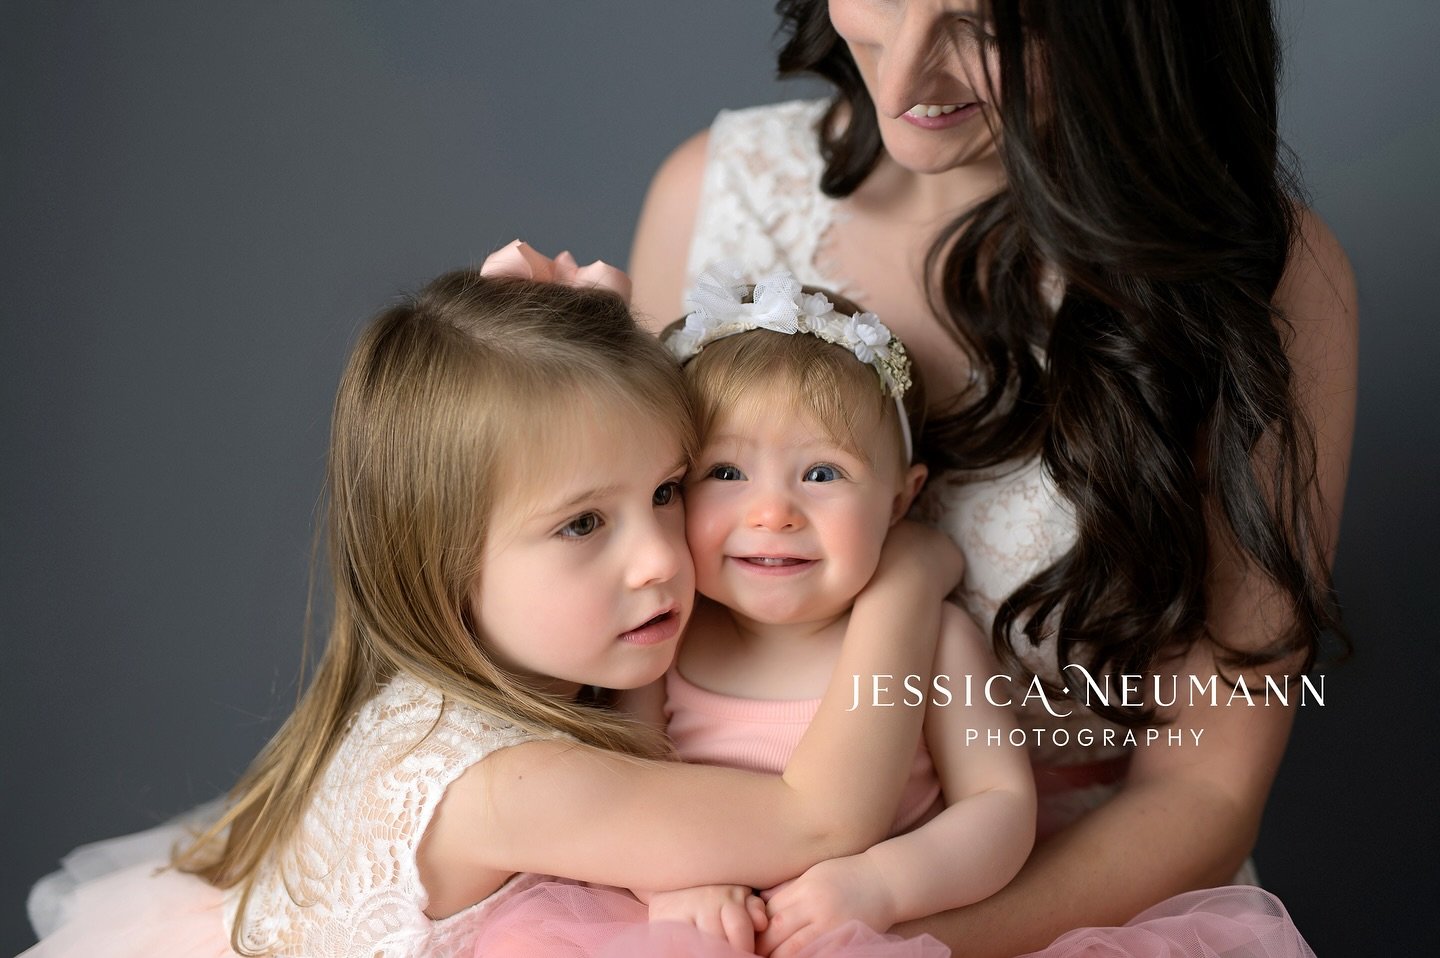 Happy Mother&rsquo;s Day 💐

Thank you for choosing JNP and allowing me to capture so many sweet moments during your family&rsquo;s milestones.

If you&rsquo;re interested in booking a session, head to my website for more examples of my work, and boo